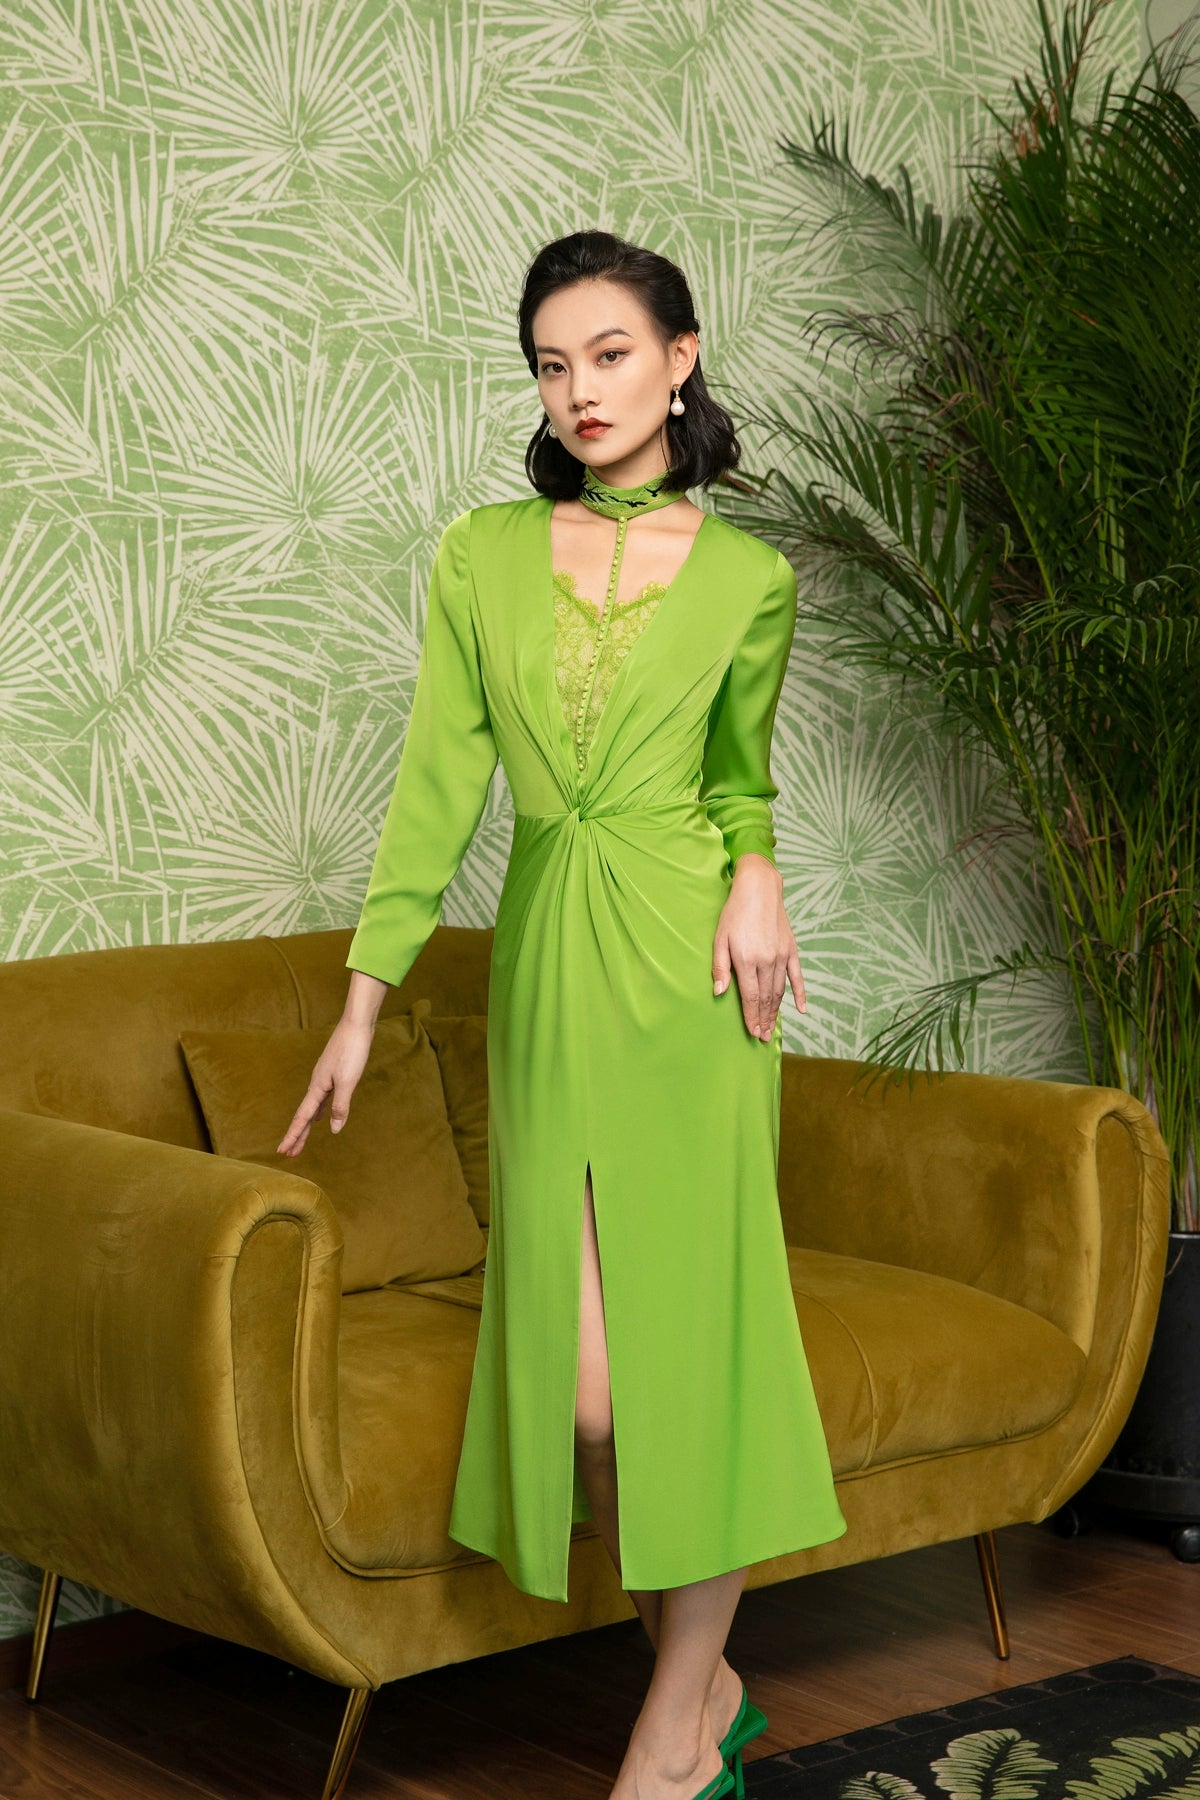 Avocado green embroidered suit beaded halter neck kinked panels lace dress set- Iona